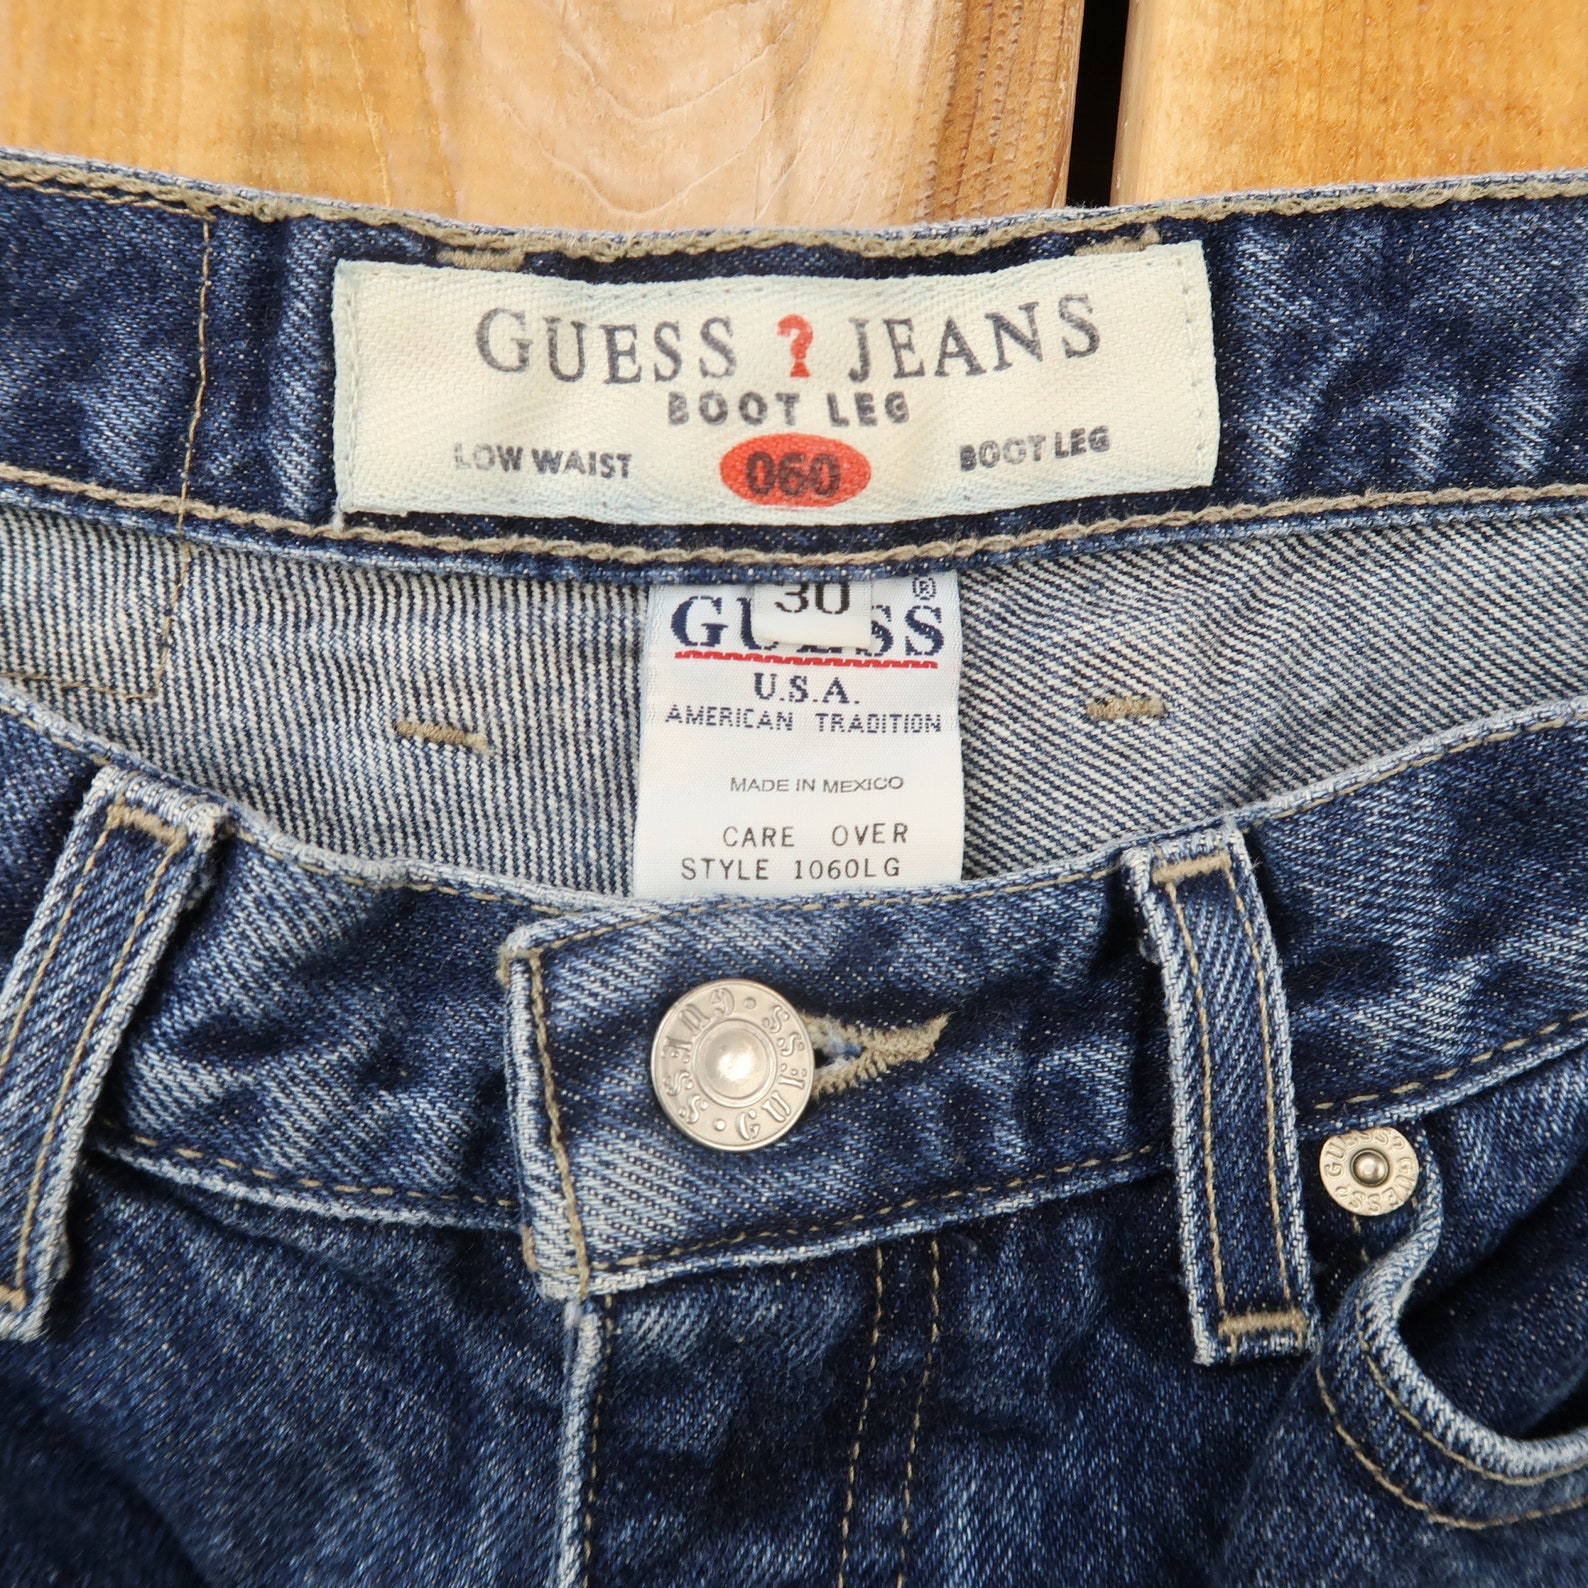  Guess  Jeans  Guess  USA  060 Low Waist Boot Leg Jeans  Size 